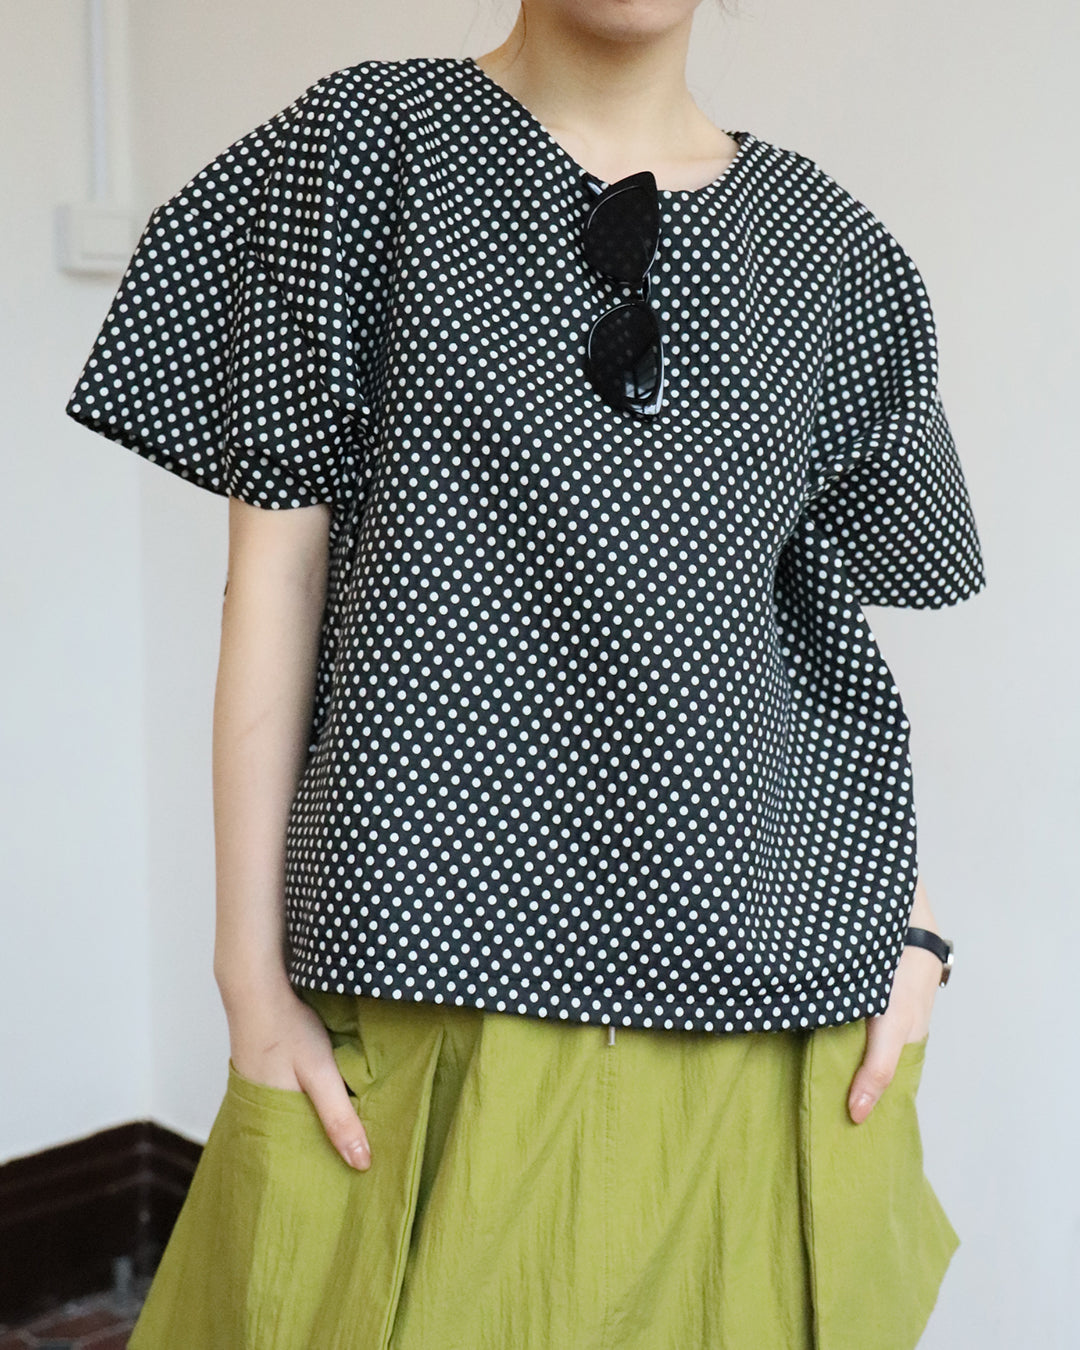 Structured Polka Dot Top